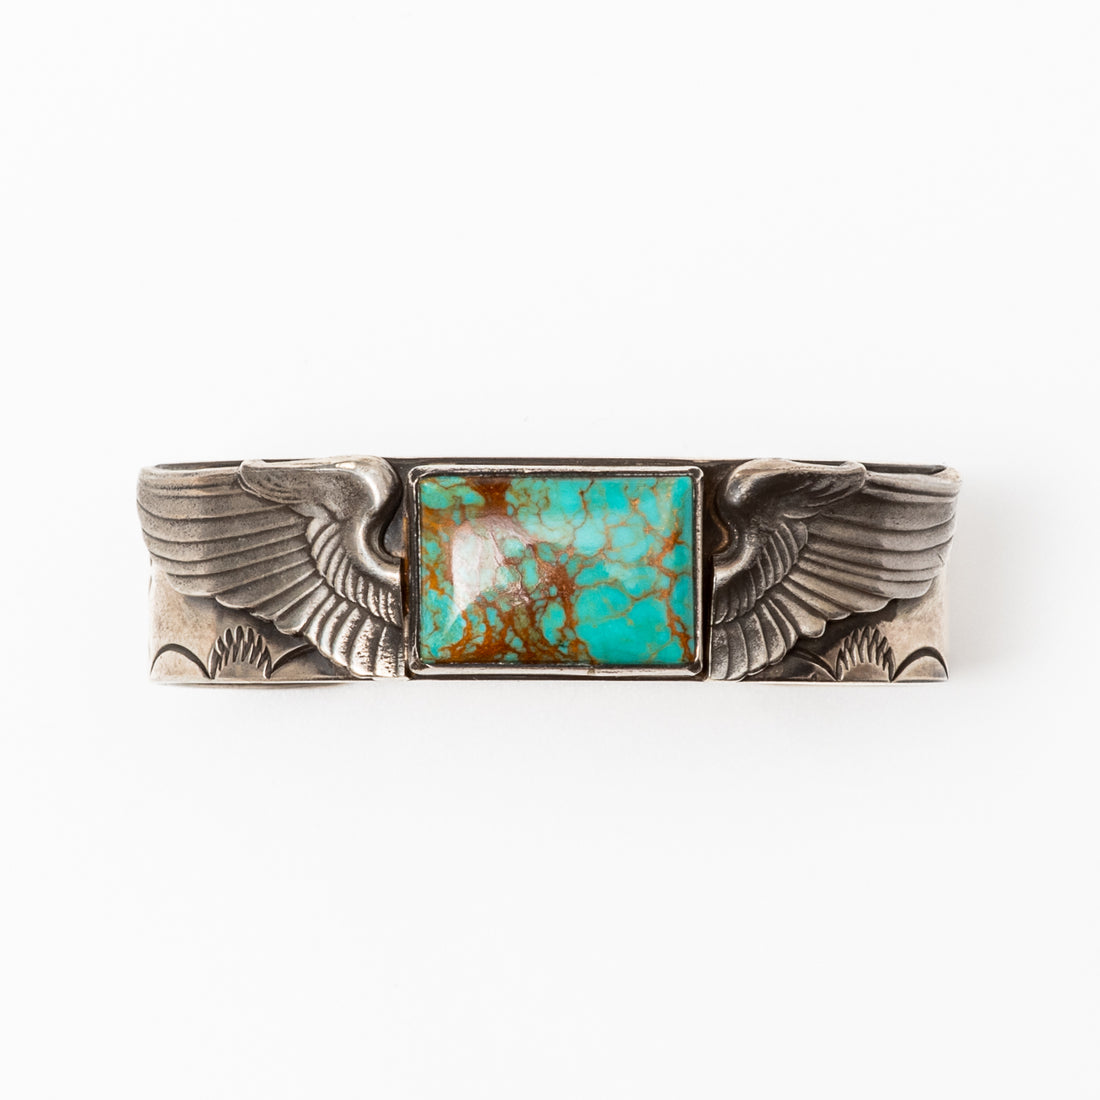 Red Rabbit Trading Co. Victory Stone Cuff